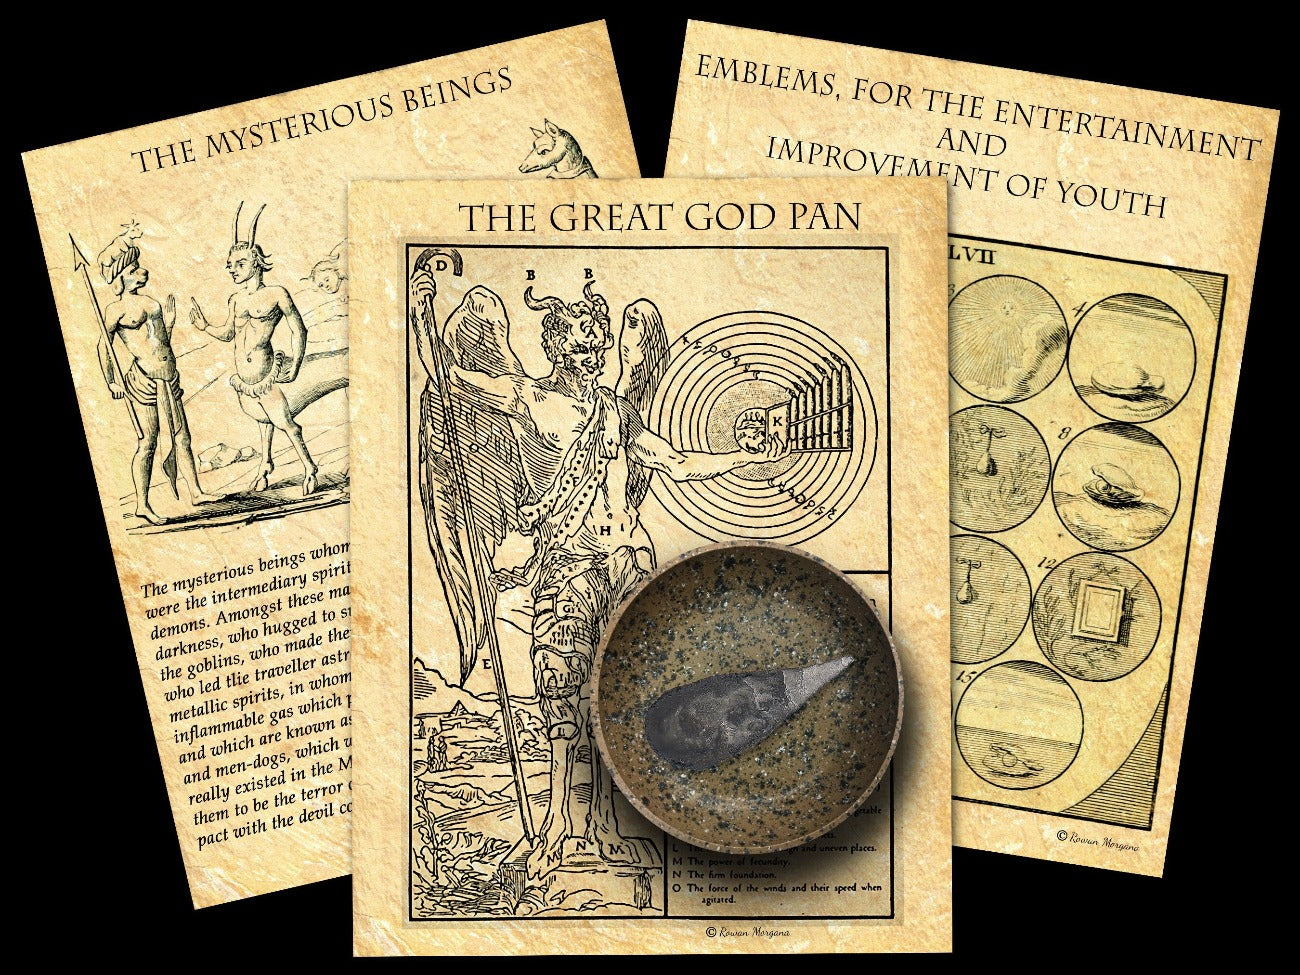 The Great God Pan, The Mysterious Beings, and Emblems for Youth.